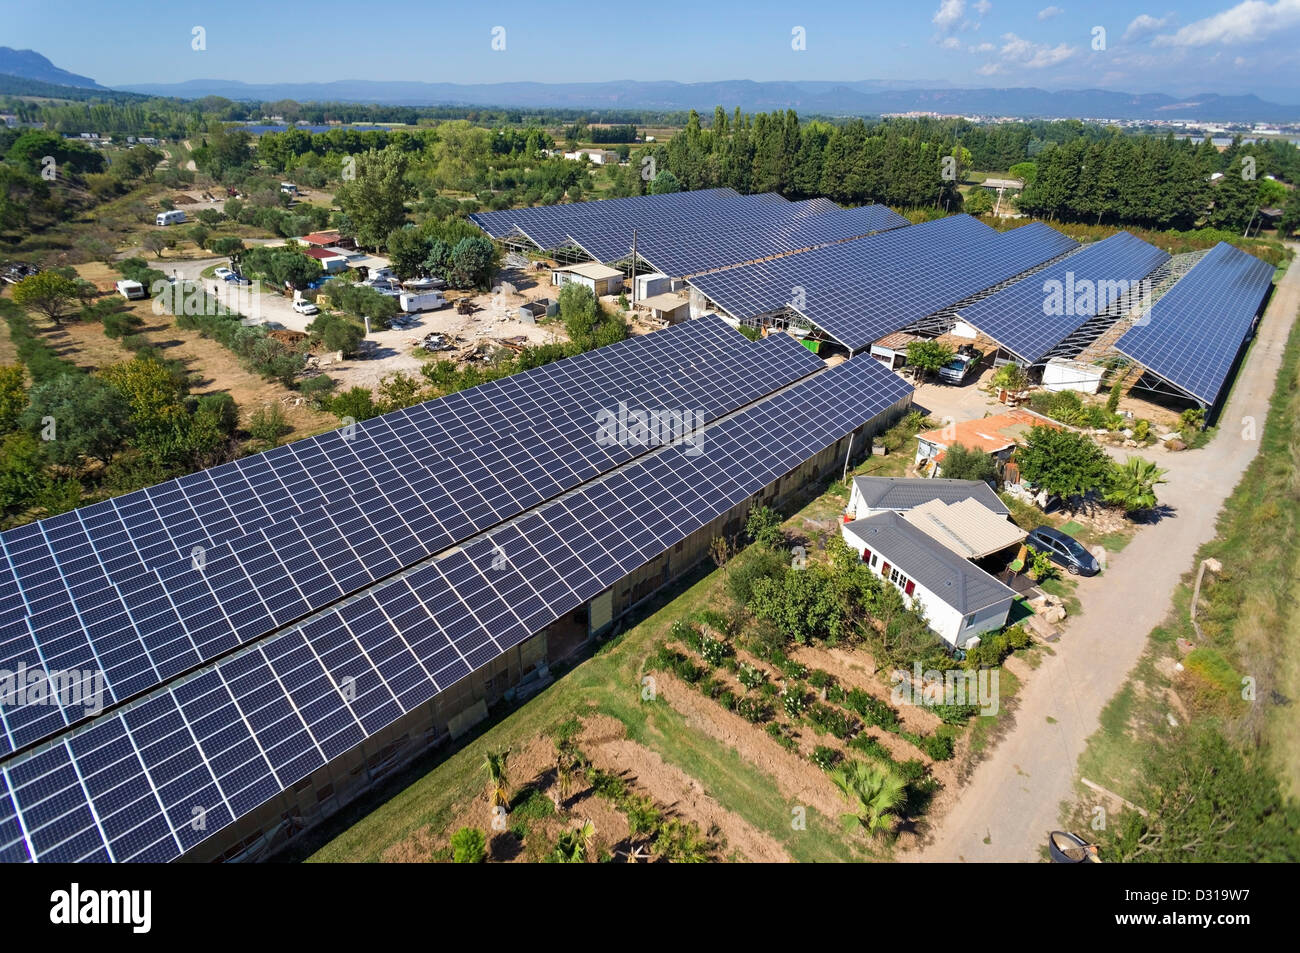 Solar panels on commercial greenhouses for food production, aerial view, Roquebrune-sur-Argens, Var region, France Stock Photo